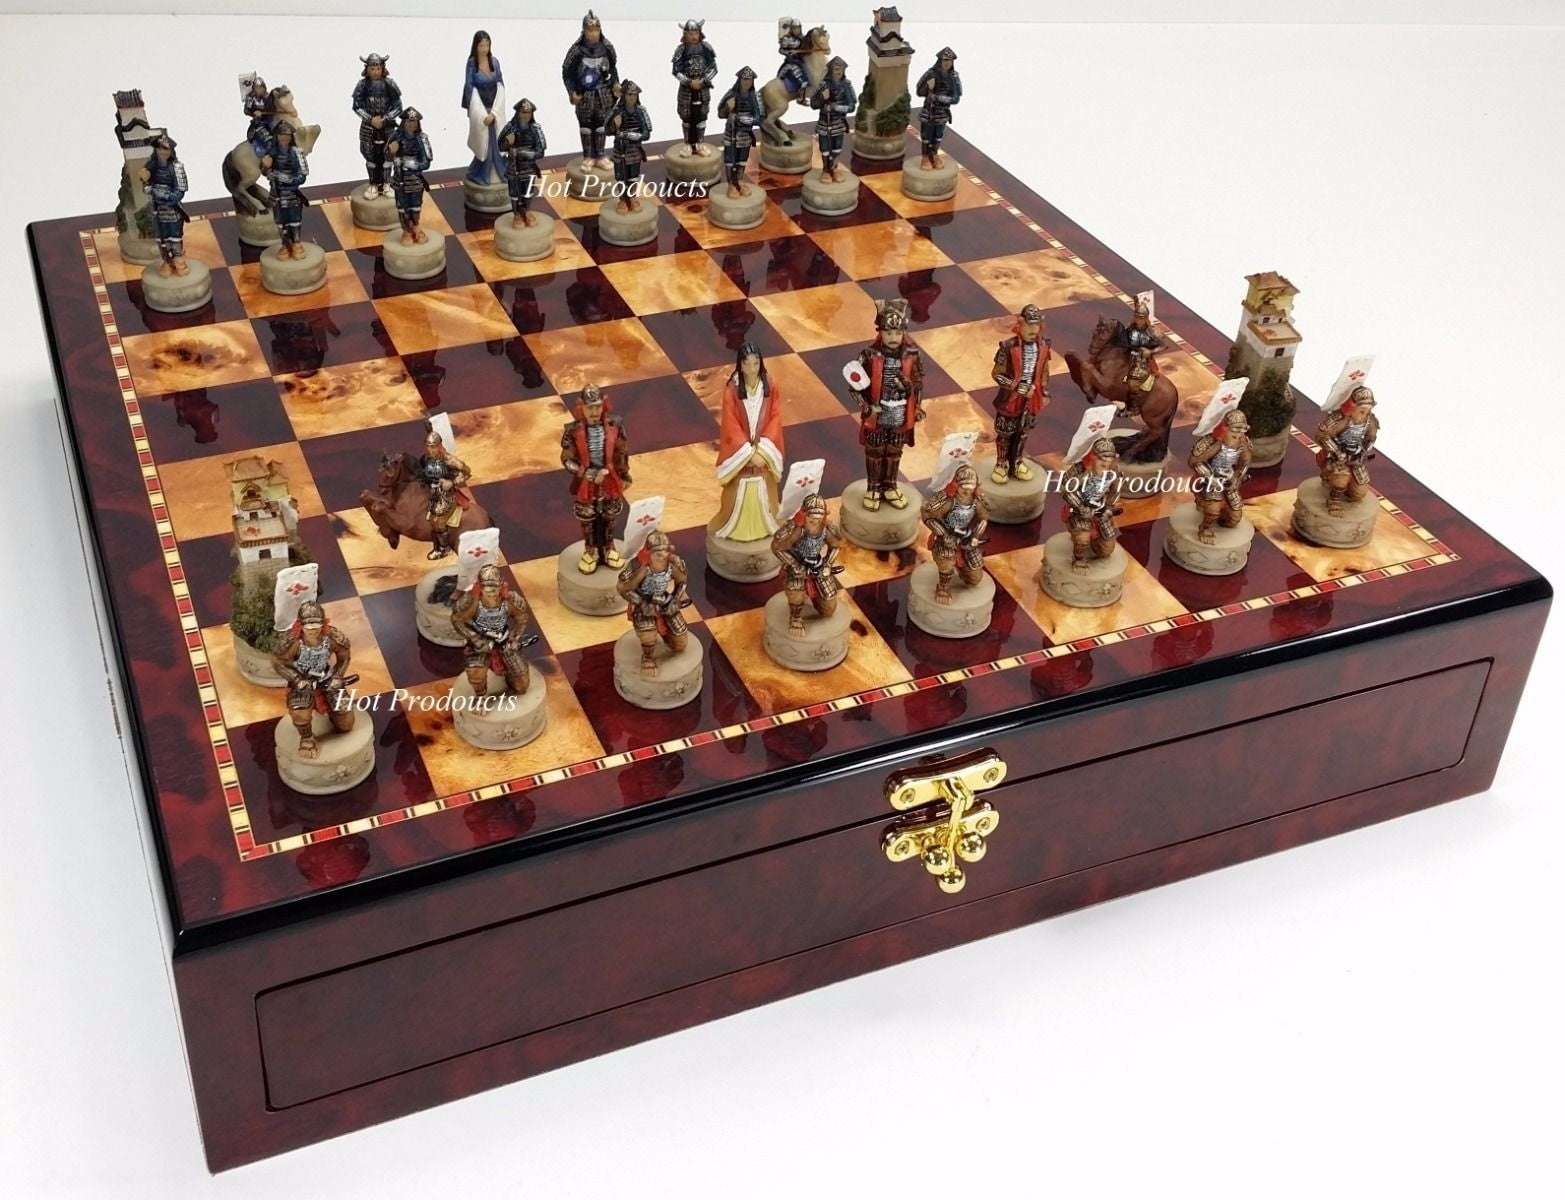 Anime Chess set, solid wooden | eBay